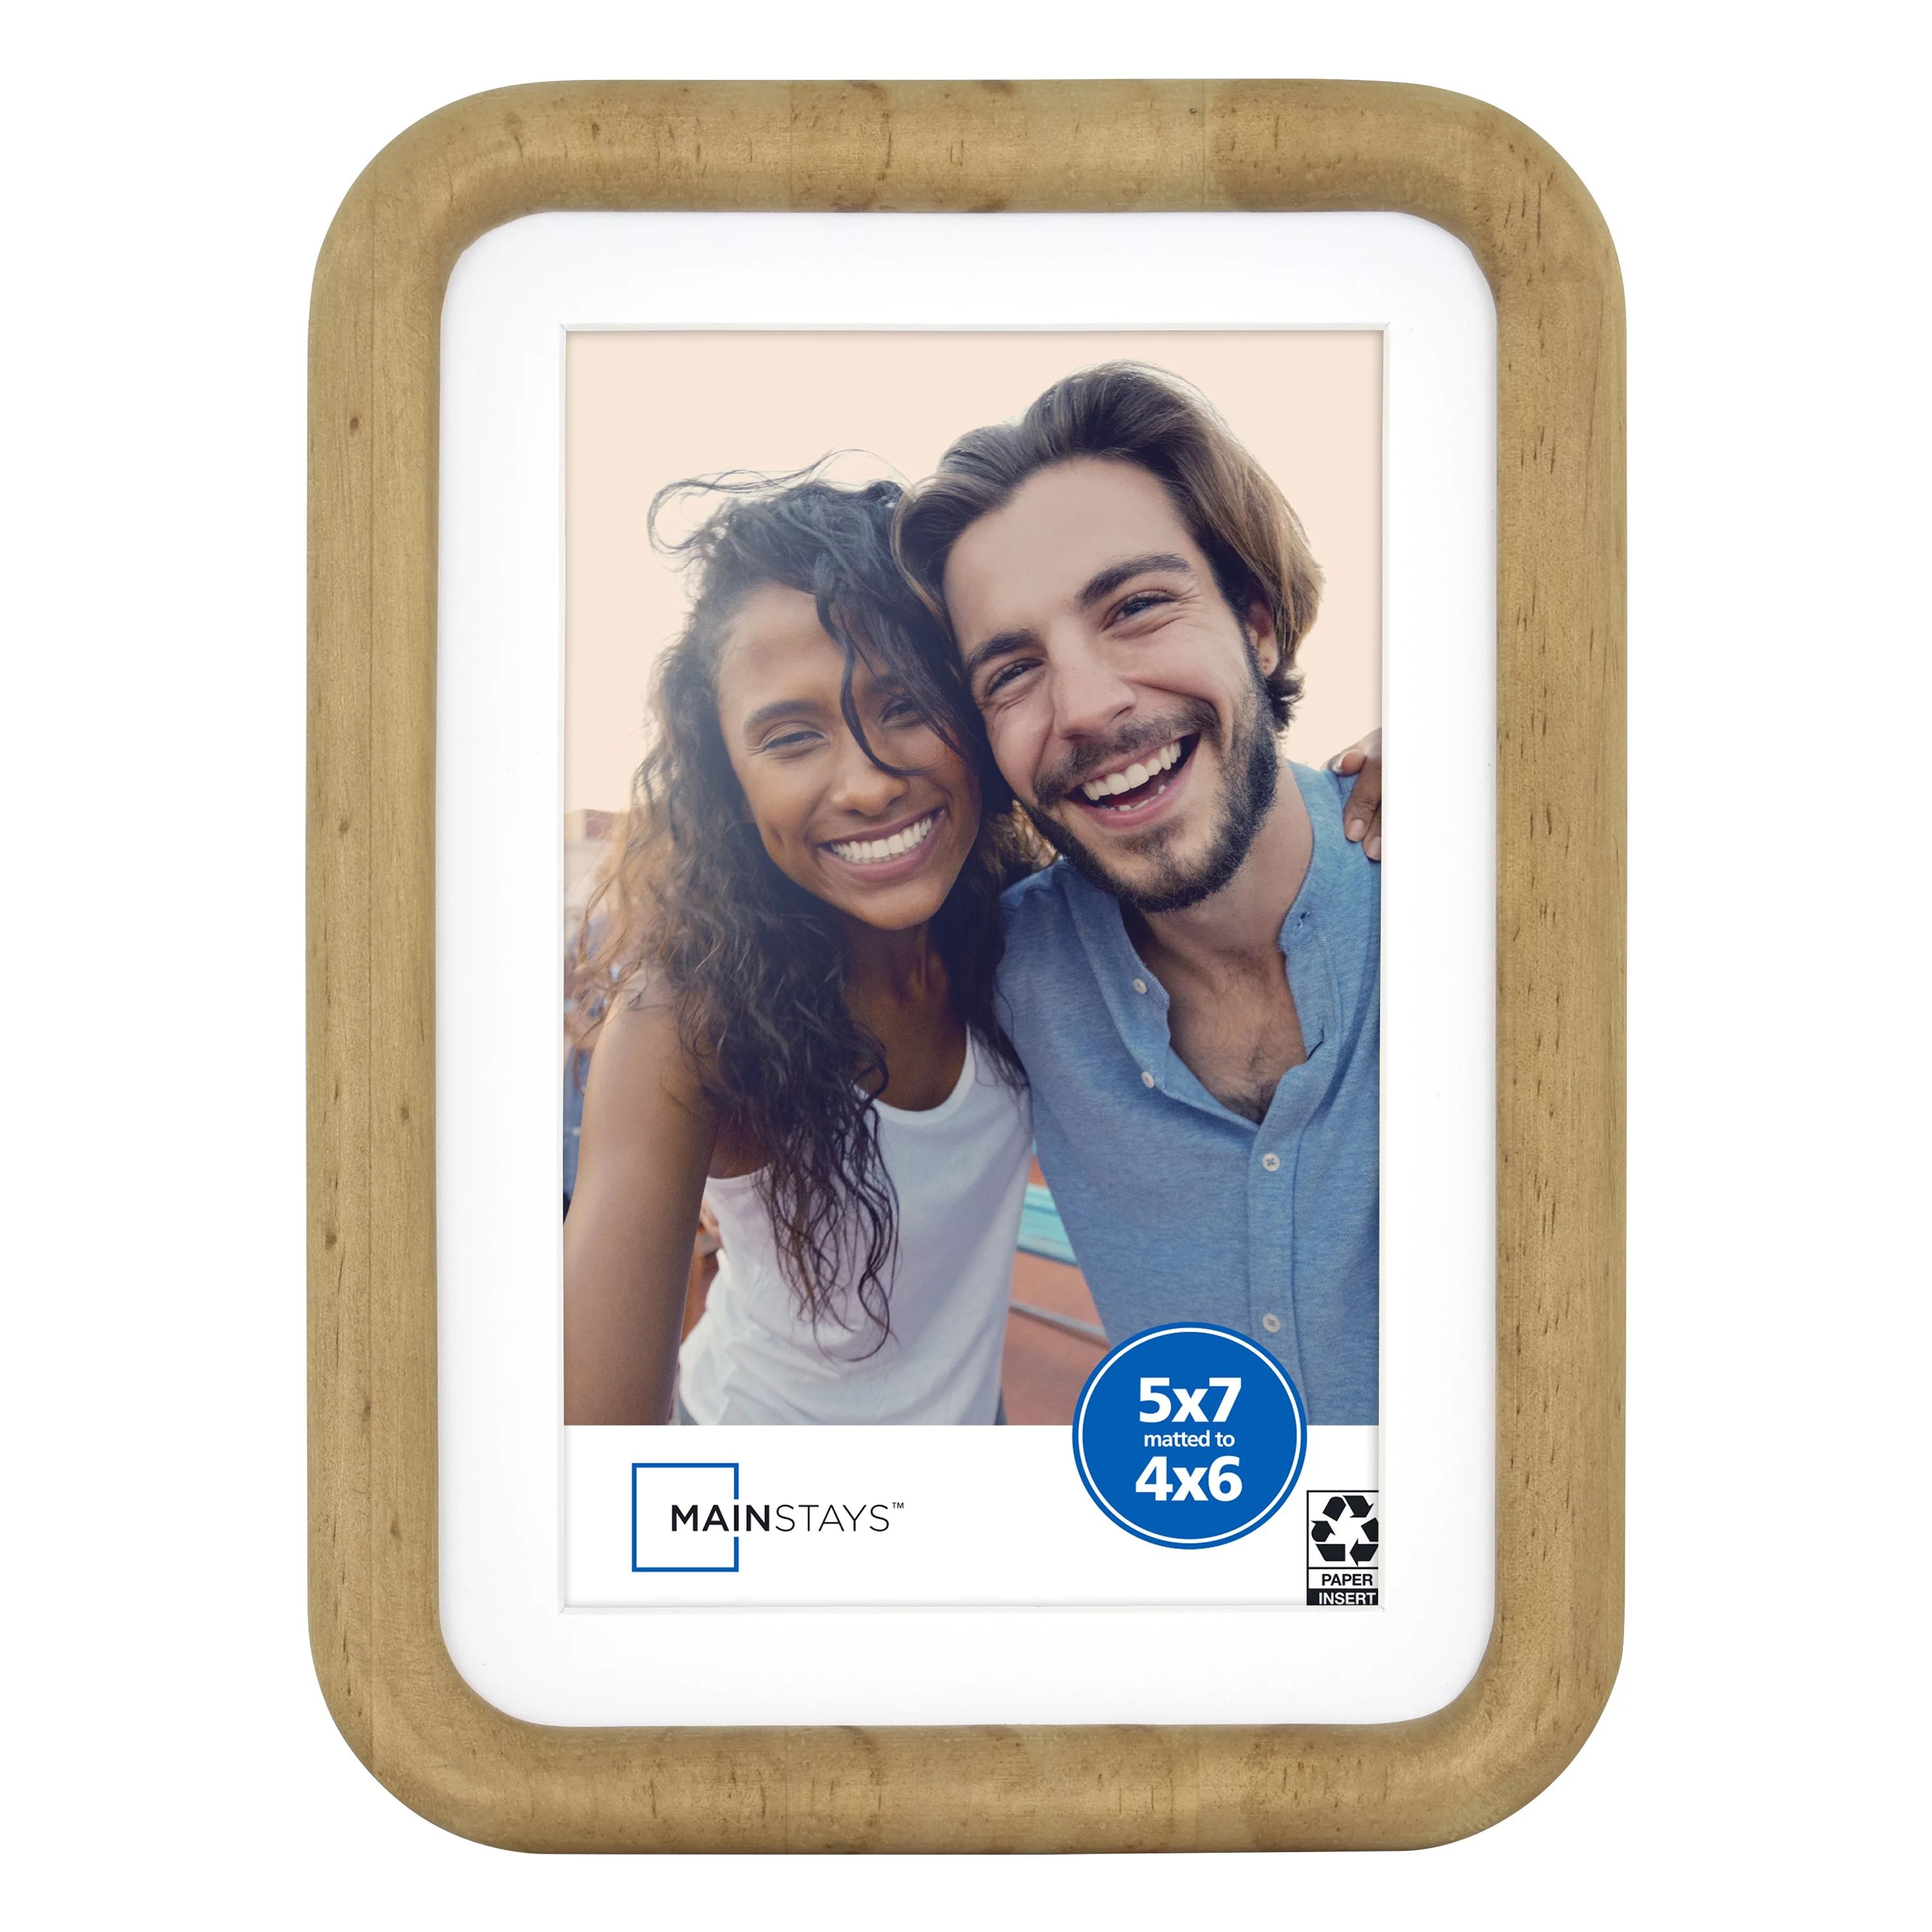 Mainstays 5x7 Matted to 4x6 Rounded Wood Tabletop Picture Frame | Walmart (US)